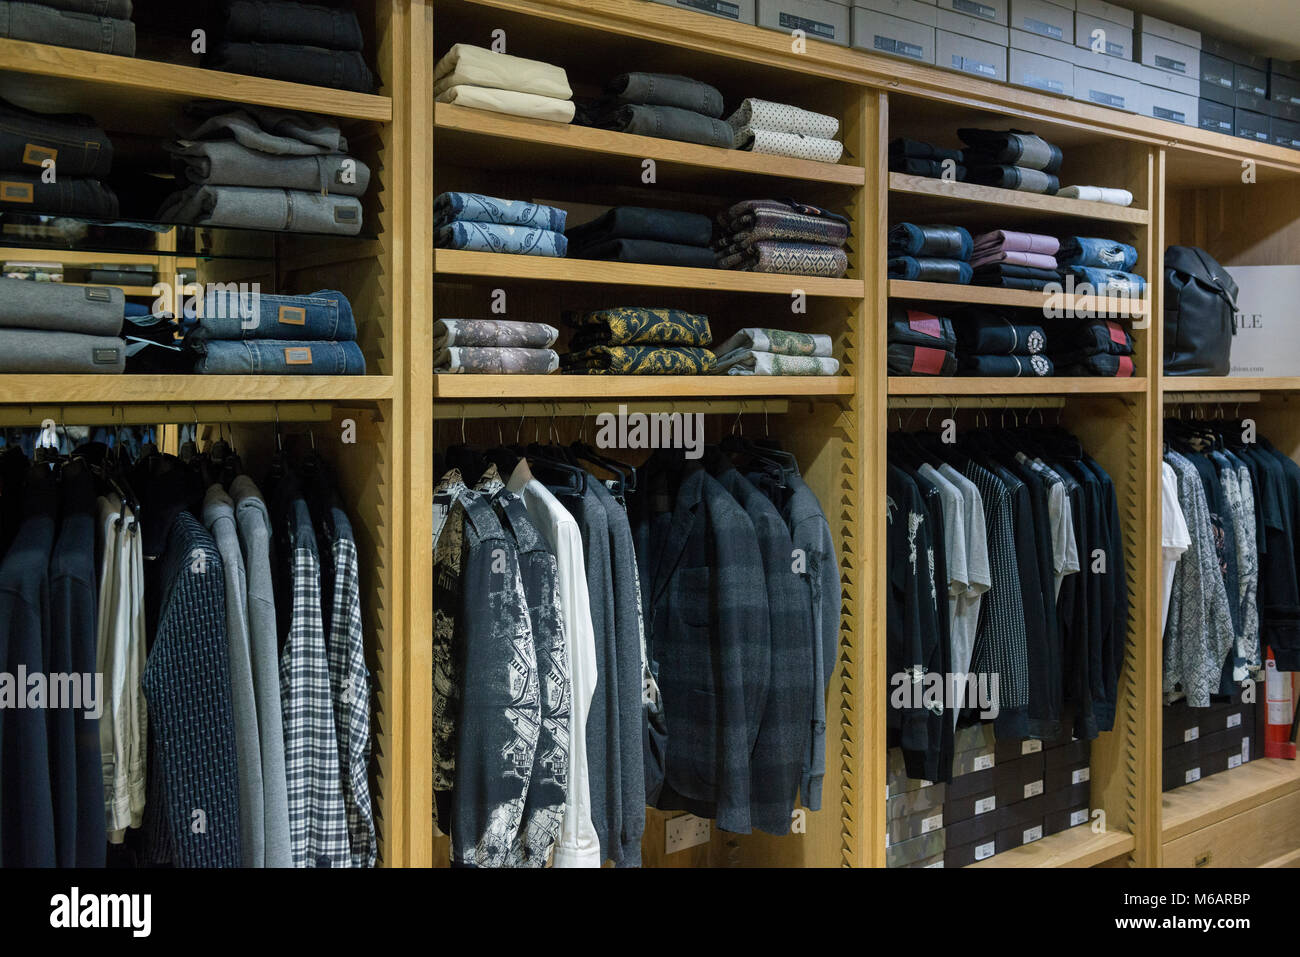 interior details of a small business shop selling mens fashion clothes and accessories. Stock Photo